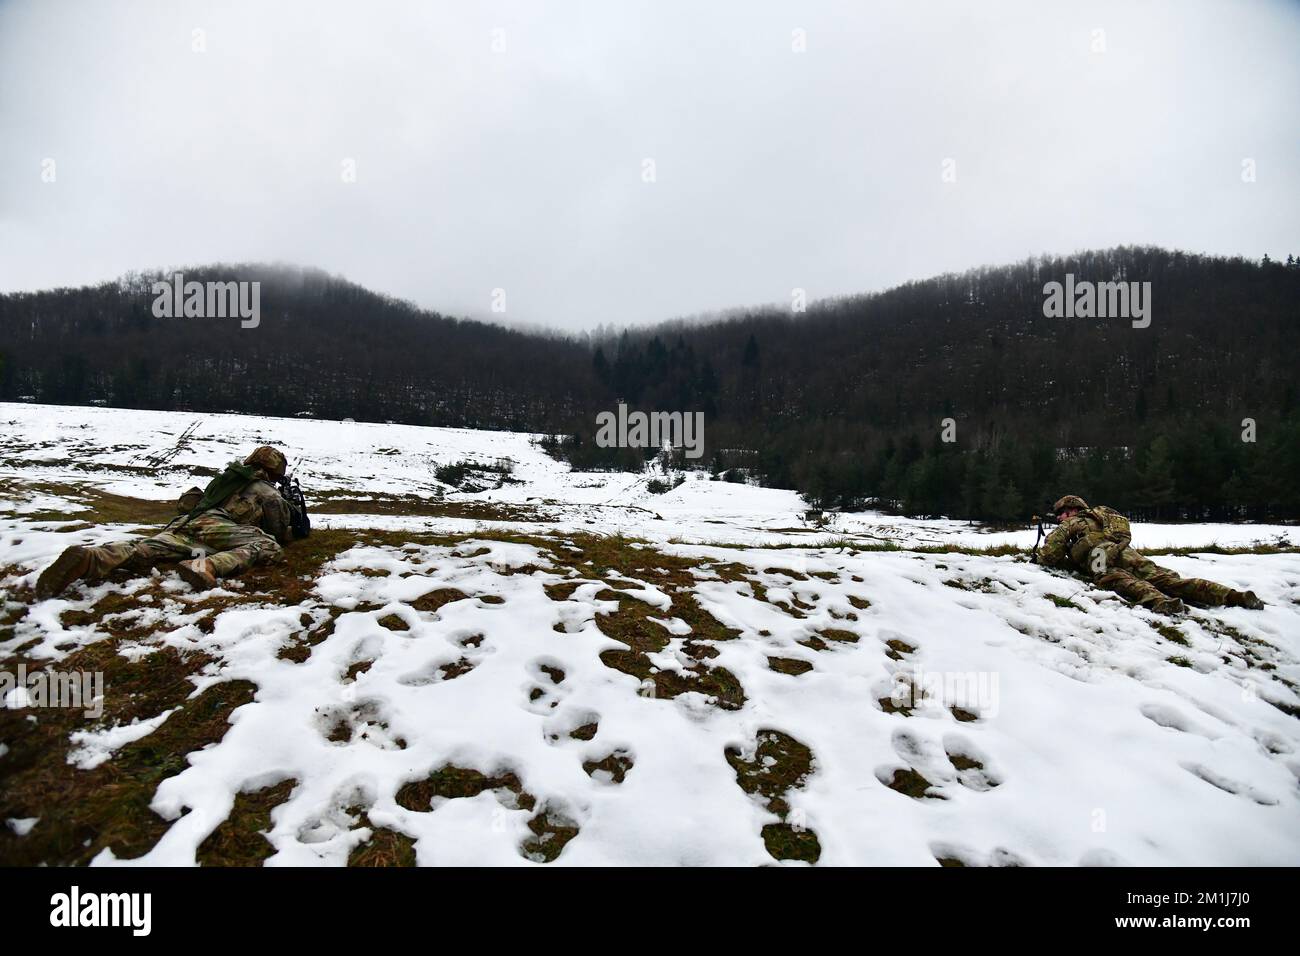 U. S. Army Paratroopers assigned to the Bastion Company, 54th Brigade Engineer Battalion, 173rd Airborne Brigade, engage a target during squad blank-fire and tactical movement training at Bloska Polica Range in Postonja, Slovenia, Dec. 6, 2022. The 173rd Airborne Brigade is the U.S. Army Contingency Response Force in Europe, capable of projecting ready forces anywhere in the U.S. European, Africa or Central Commands' areas of responsibility. (U.S. Army Photo by Paolo Bovo) Stock Photo